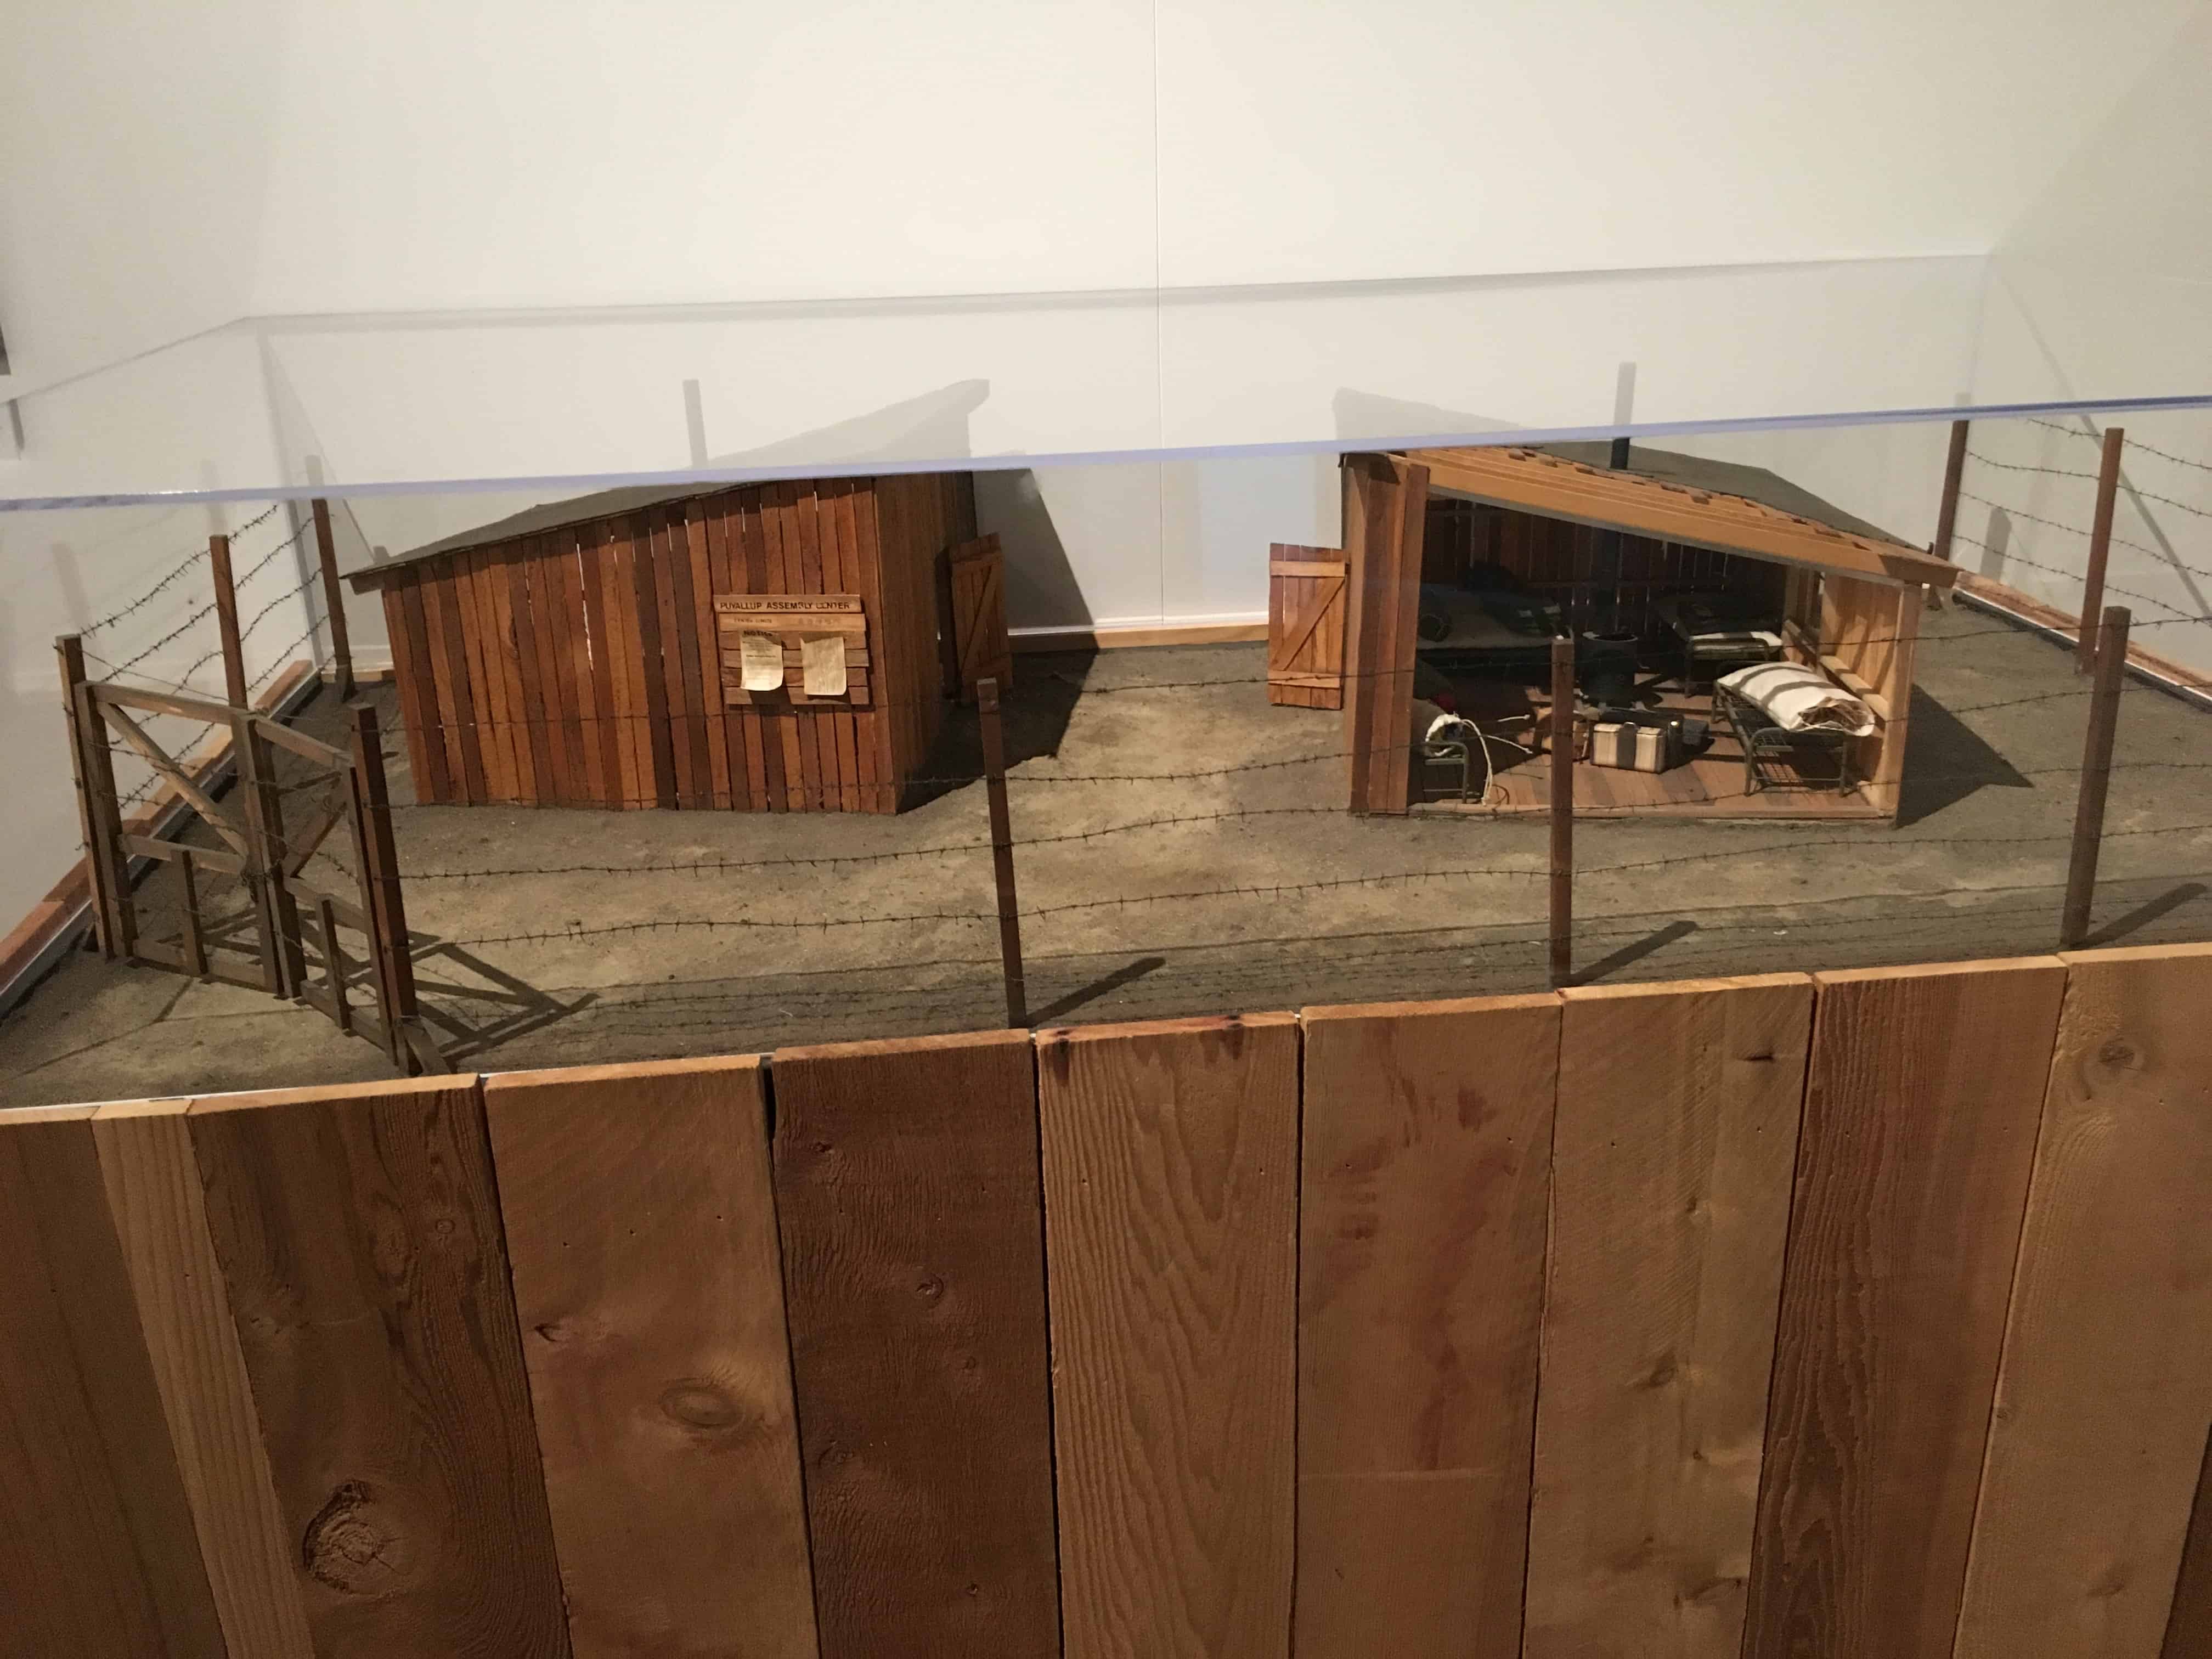 Model of a Japanese internment camp at the Wing Luke Museum in the International District in Seattle, Washington